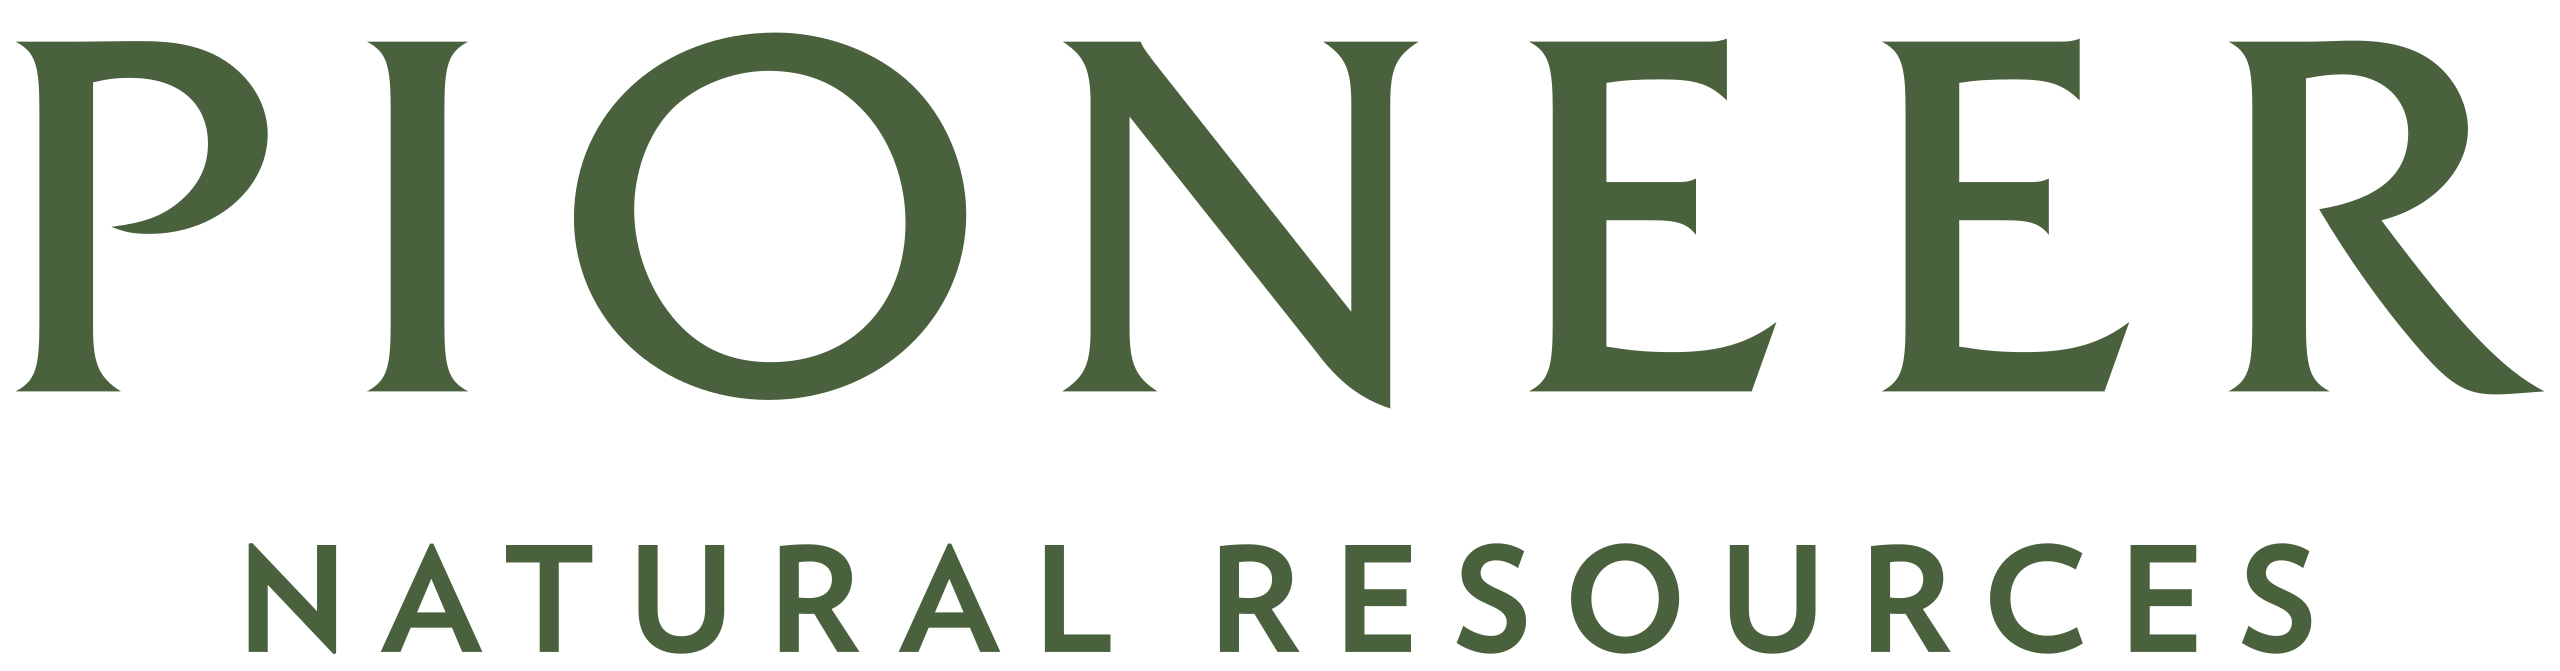 2560px-Pioneer Natural Resources logo.svg